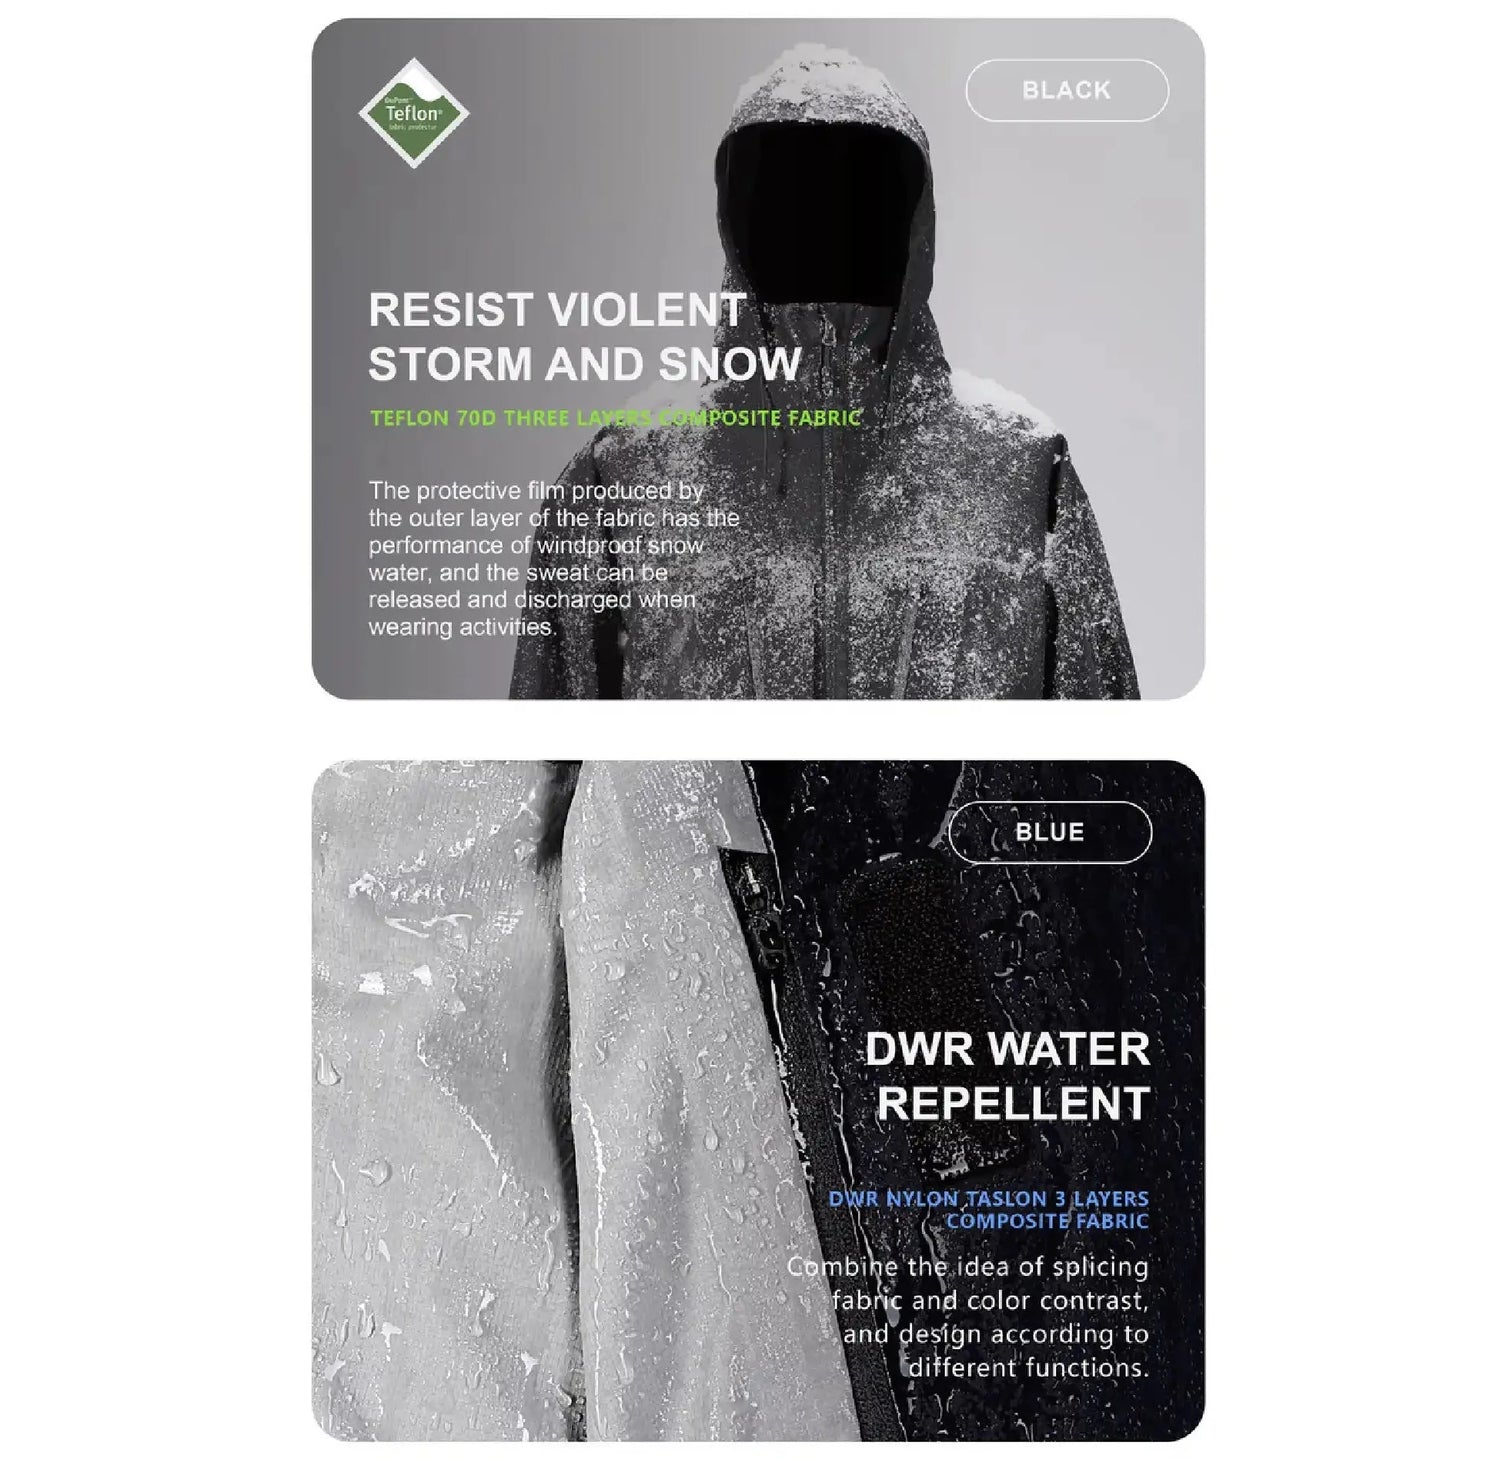 Resist violent storm and snow and DWR water repellent by Clotechnow